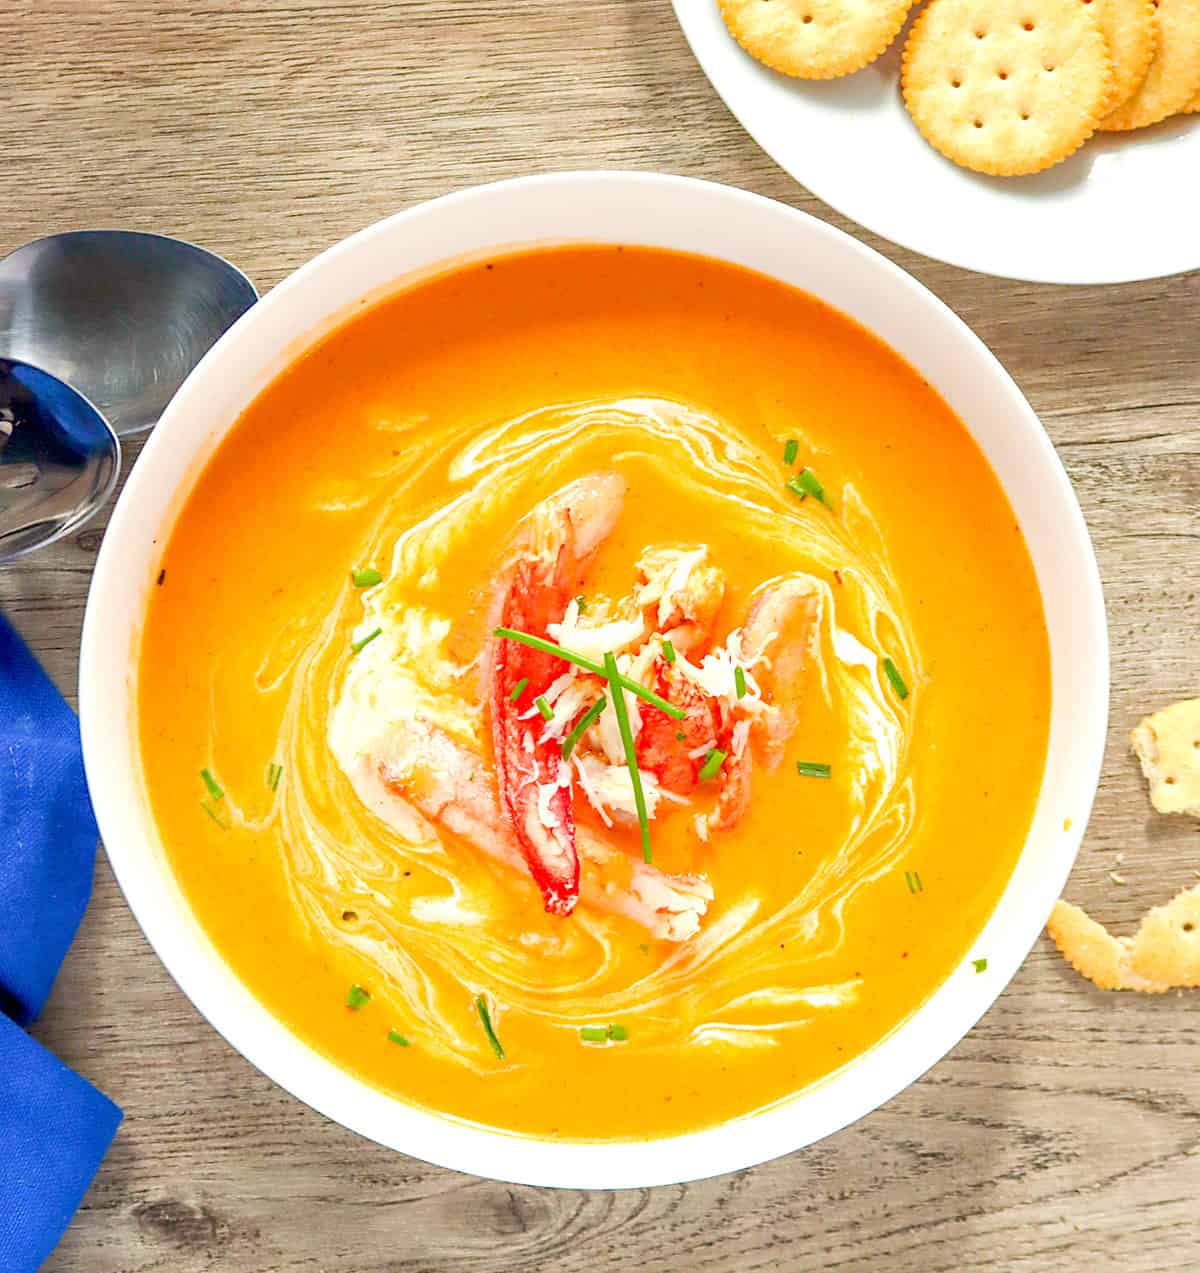 Crab bisque with crackers for an elegant dinner appetizer